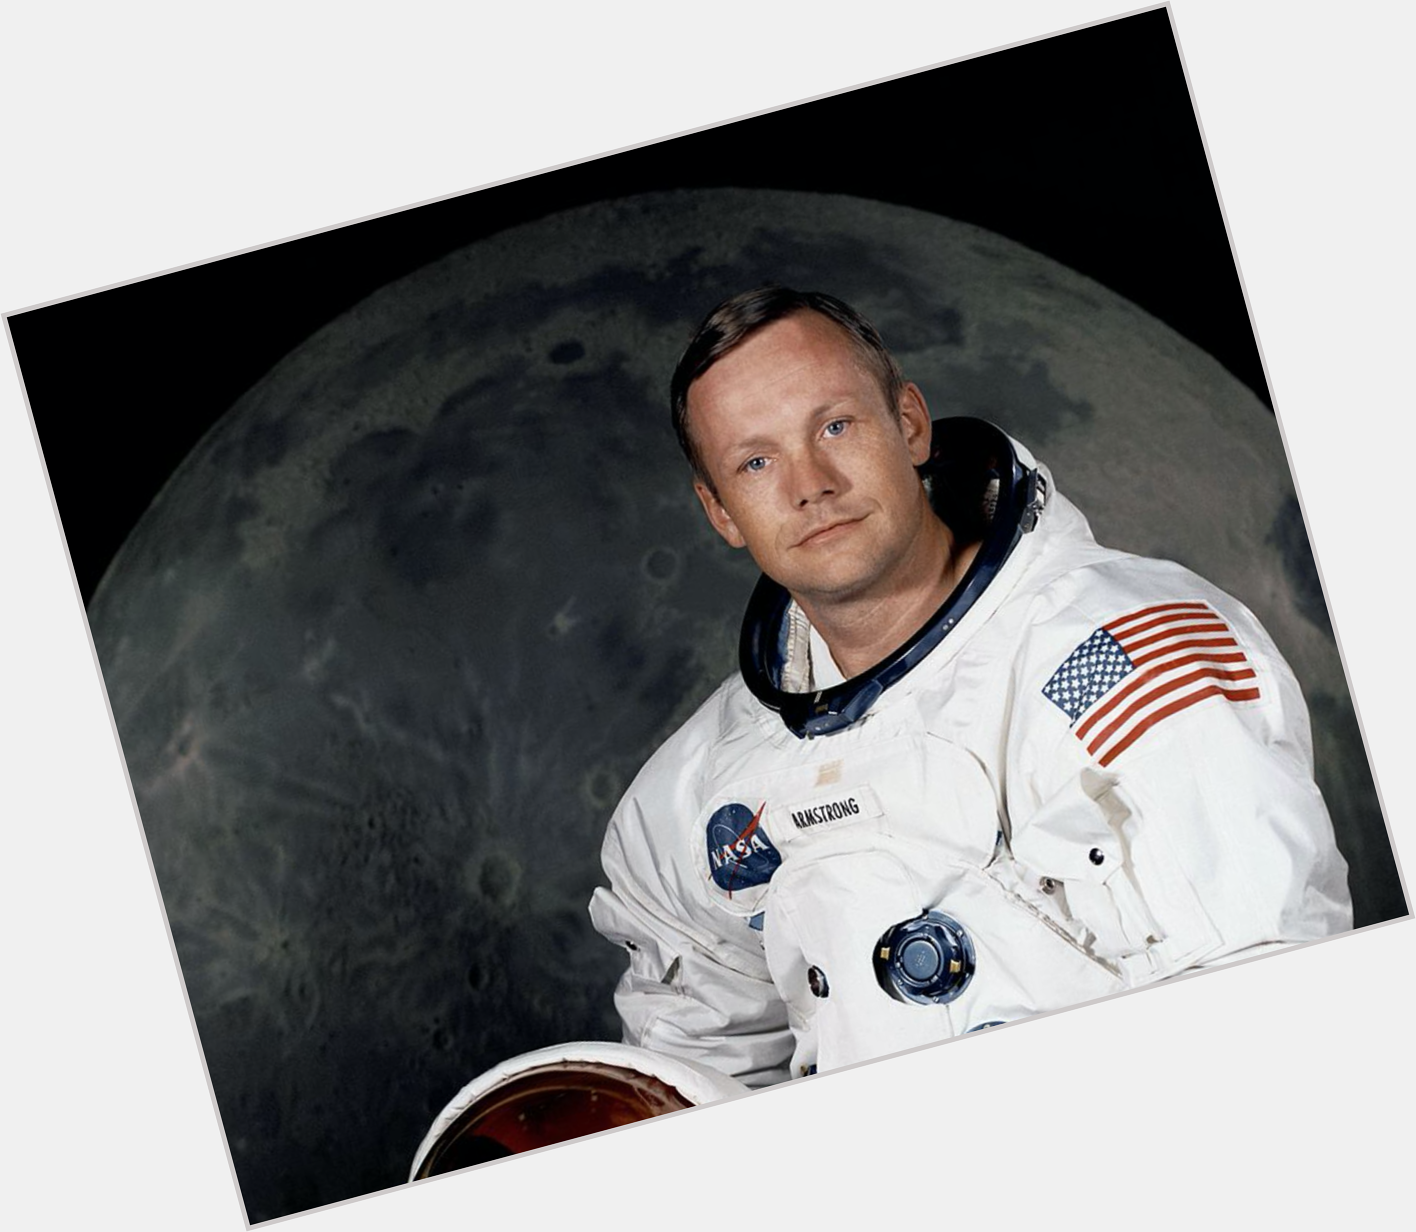 Happy Birthday to the late Neil Armstrong, the first man to walk on the moon! 